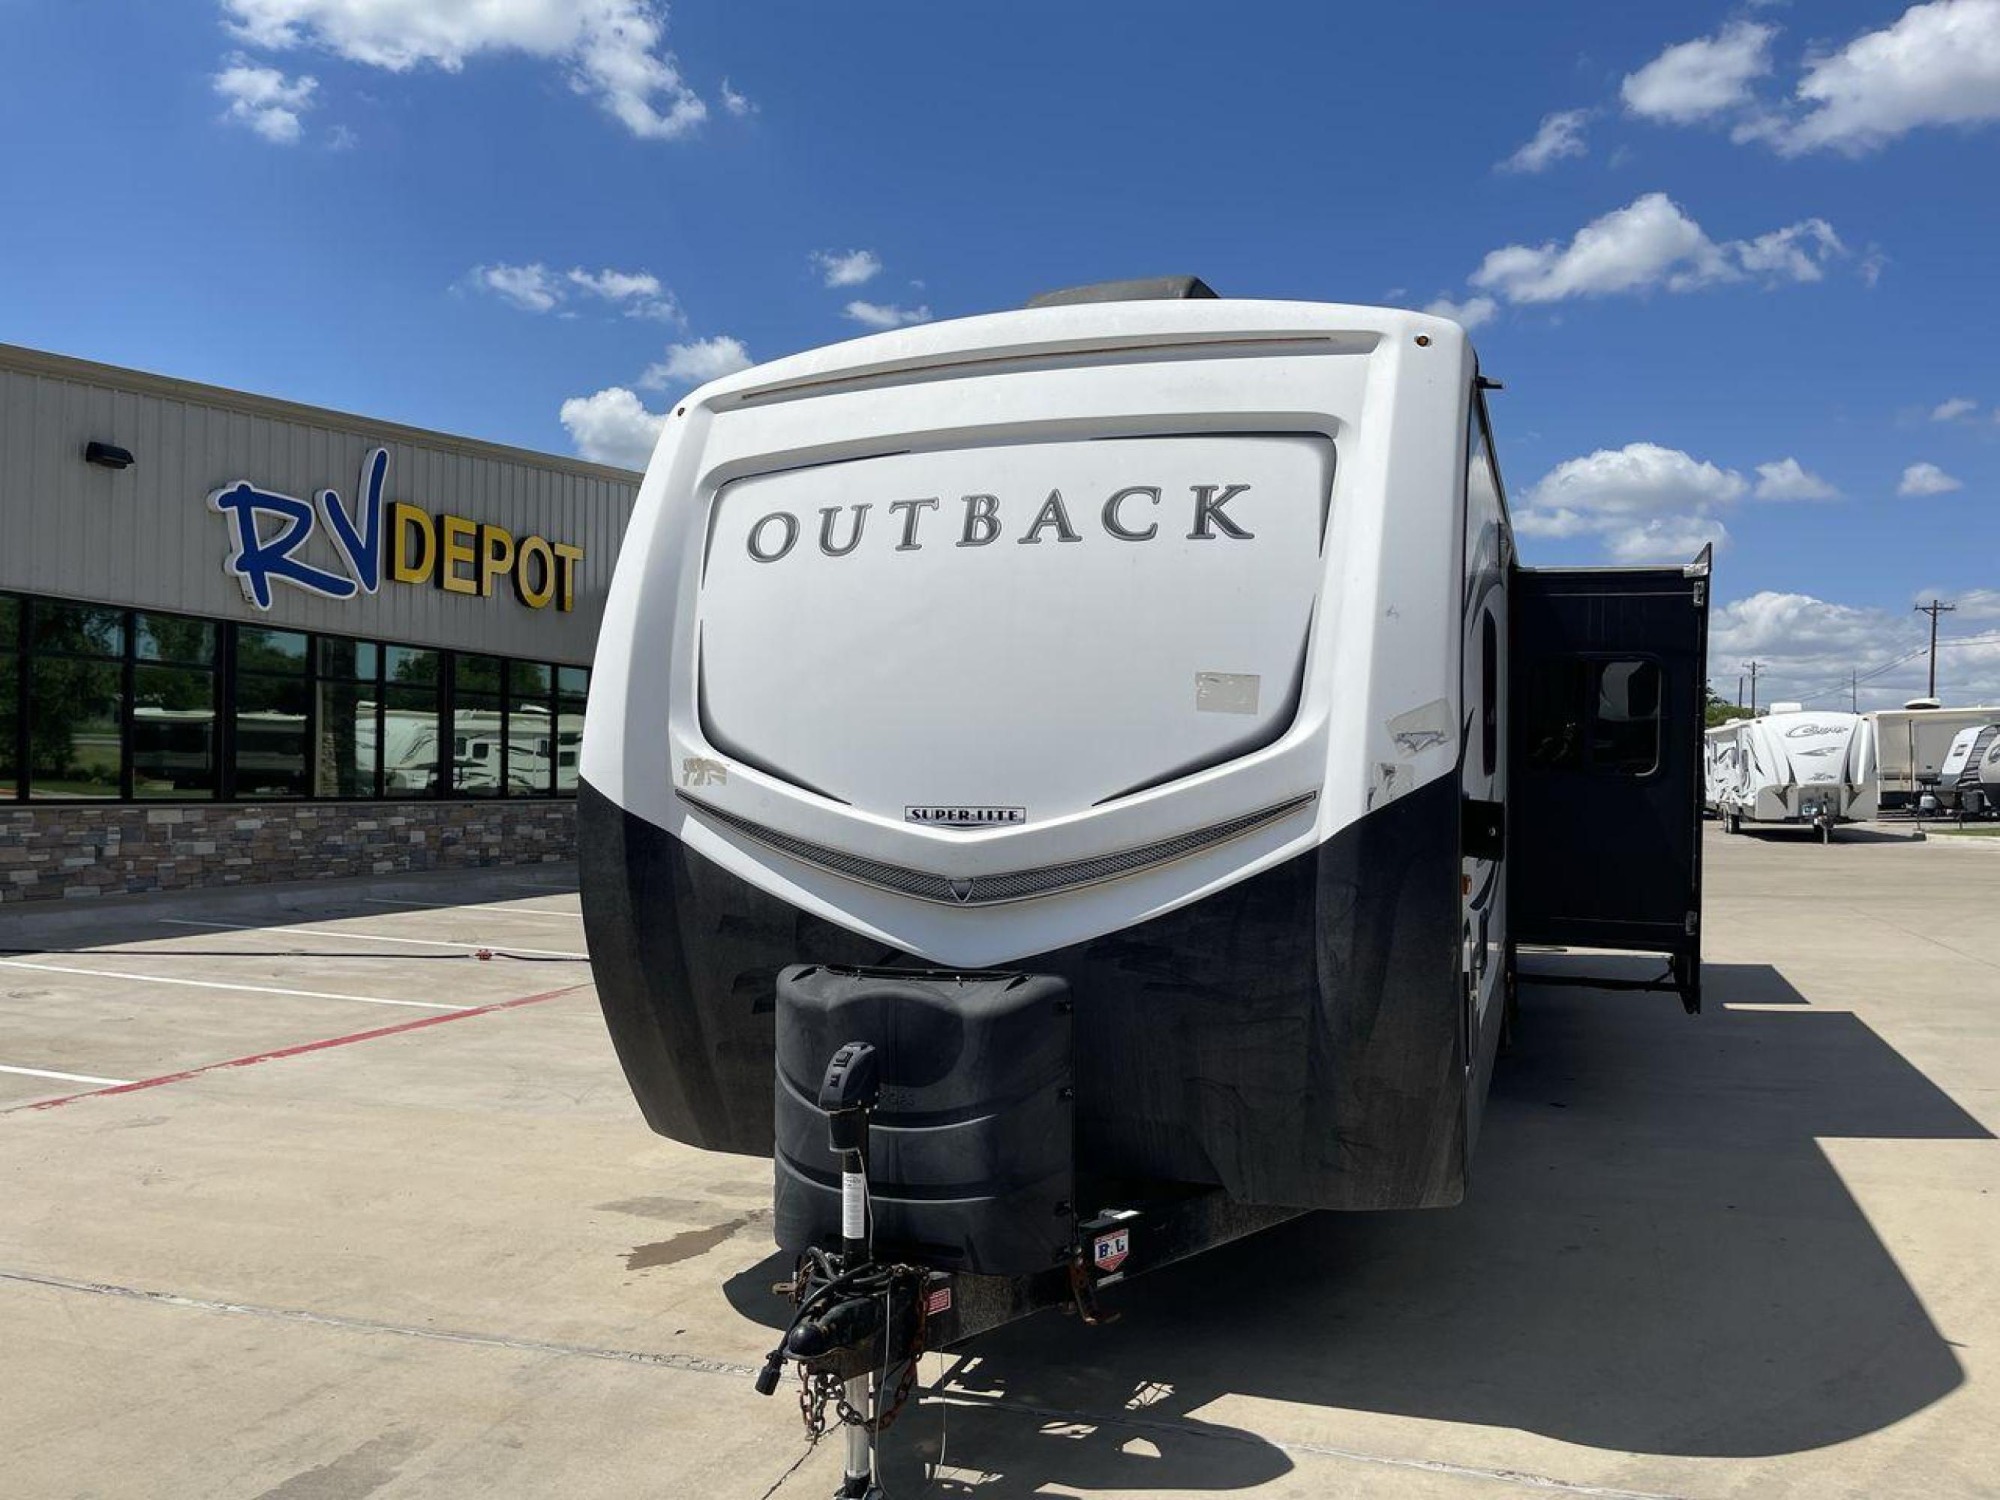 2018 BLACK KEYSTONE RV OUTBACK 325BH (4YDT32520JB) , Length: 37.42 ft. | Dry Weight: 8,428 lbs. | Gross Weight: 10,500 lbs. | Slides: 3 transmission, located at 4319 N Main St, Cleburne, TX, 76033, (817) 678-5133, 32.385960, -97.391212 - Gather the family inside this Outback Super Lite 325BH by Keystone RV, which features a bunkhouse, front bedroom, outside kitchen, and triple slides. The dimensions of this 325BH model are 37.42 ft in length, 8 ft in width, and 11.33 ft in height. It has a dry weight of 8,428 lbs with a payload capa - Photo #0